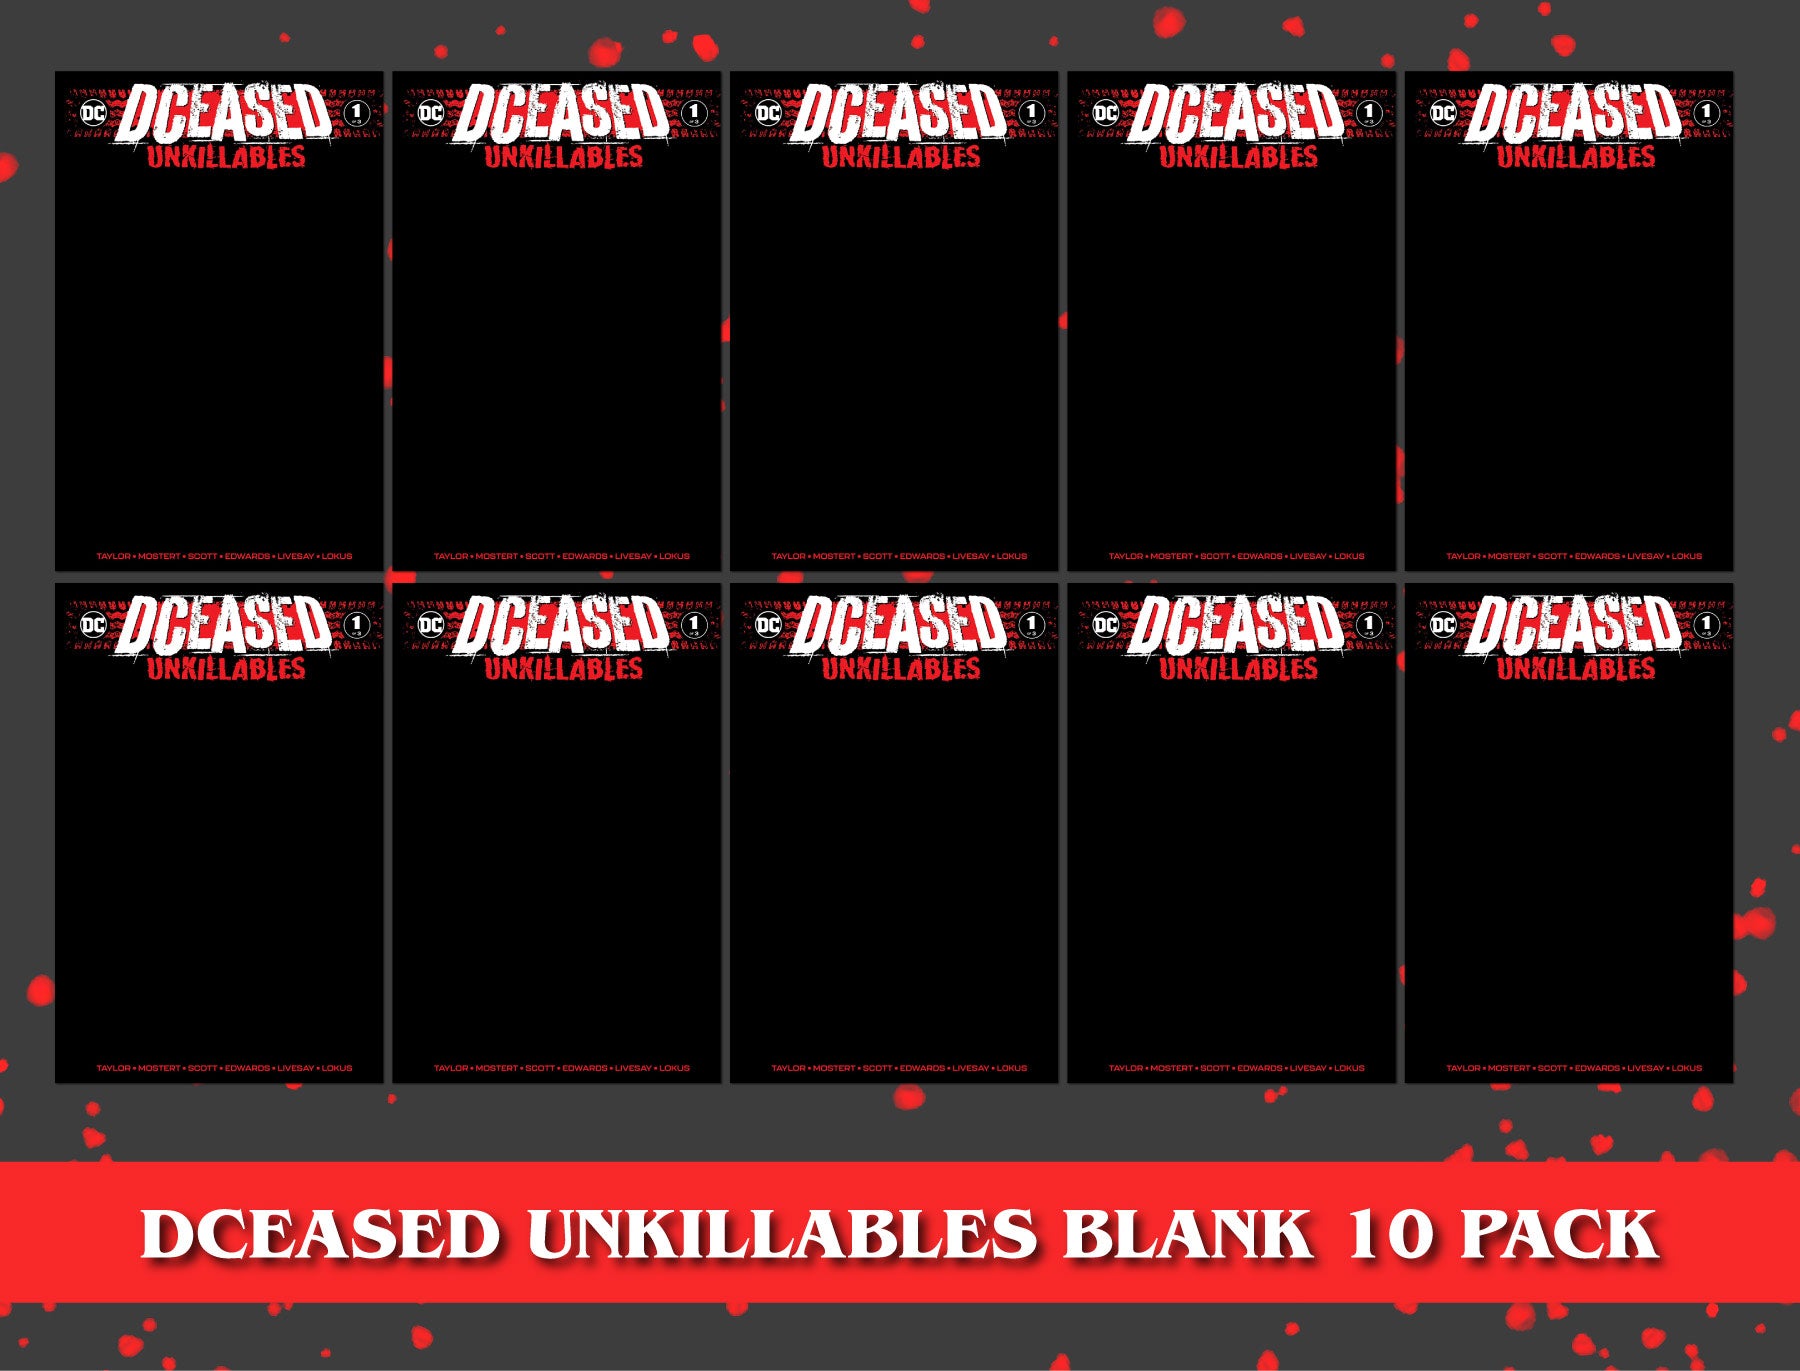 [10 PACK] DCEASED UNKILLABLES #1 (OF 3) UNKNOWN COMICS BLACK BLANK EXCLUSIVE VAR (02/15/2023)